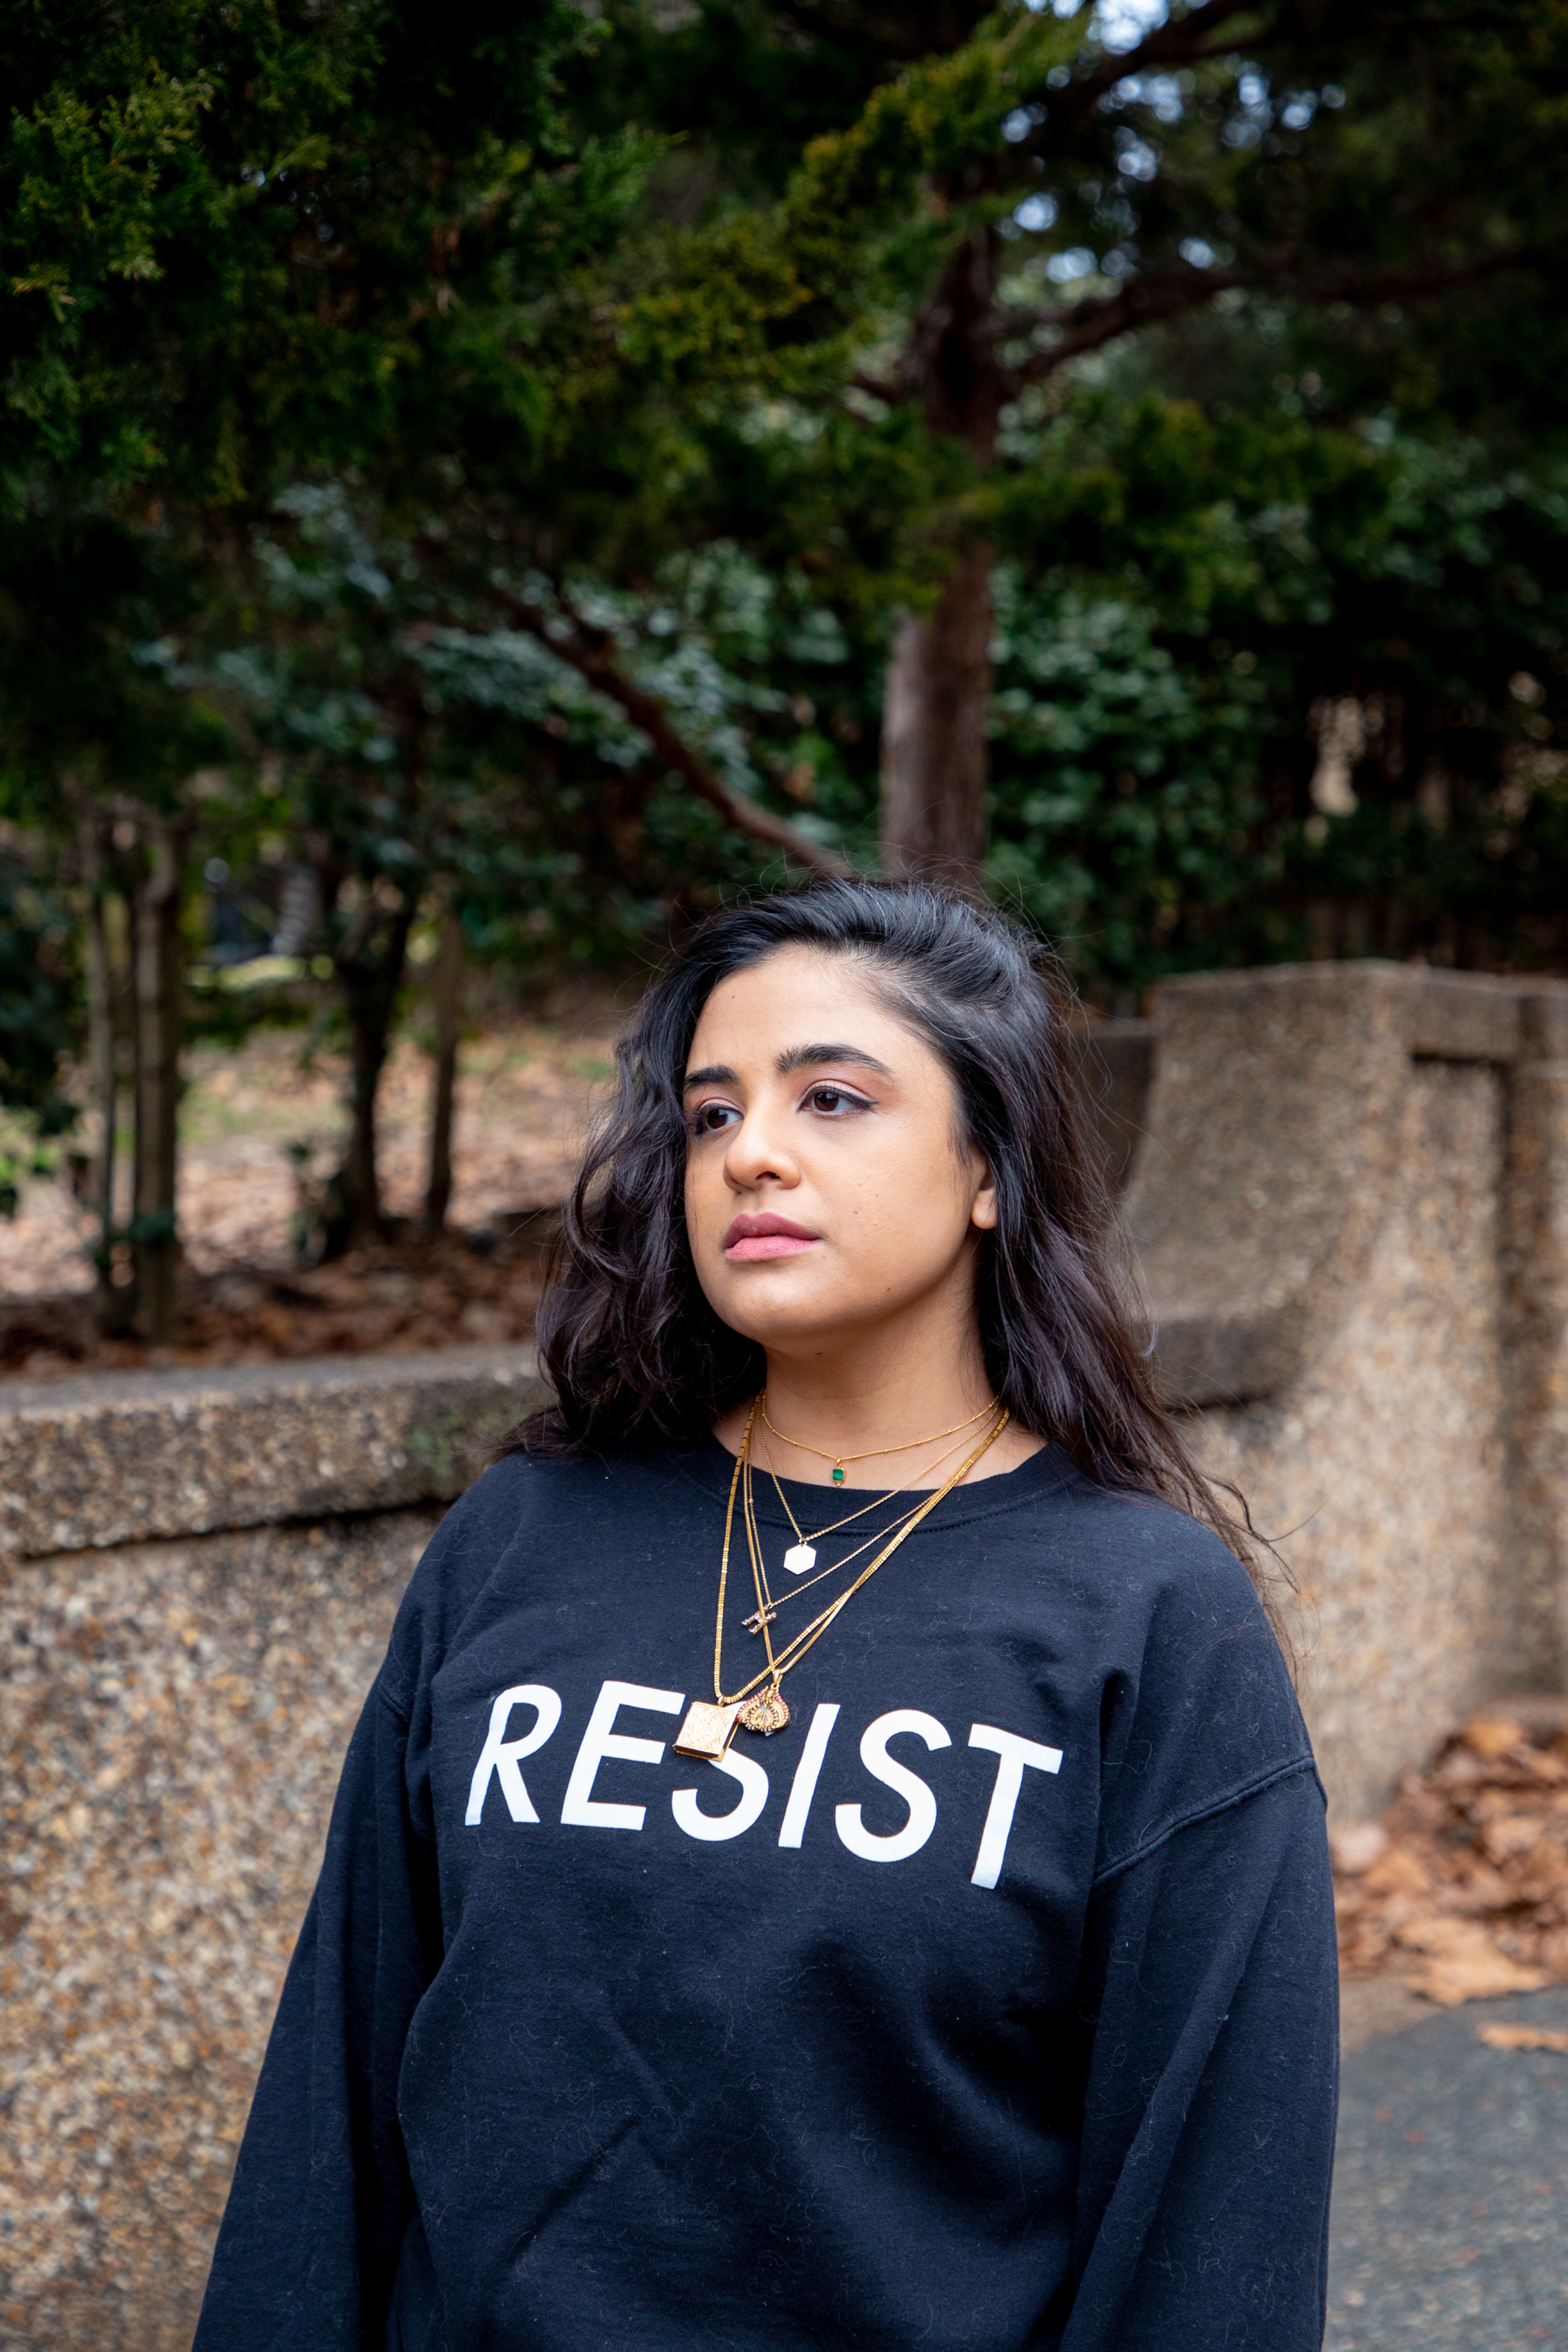 A young woman in a &quot;RESIST&quot; sweatshirt